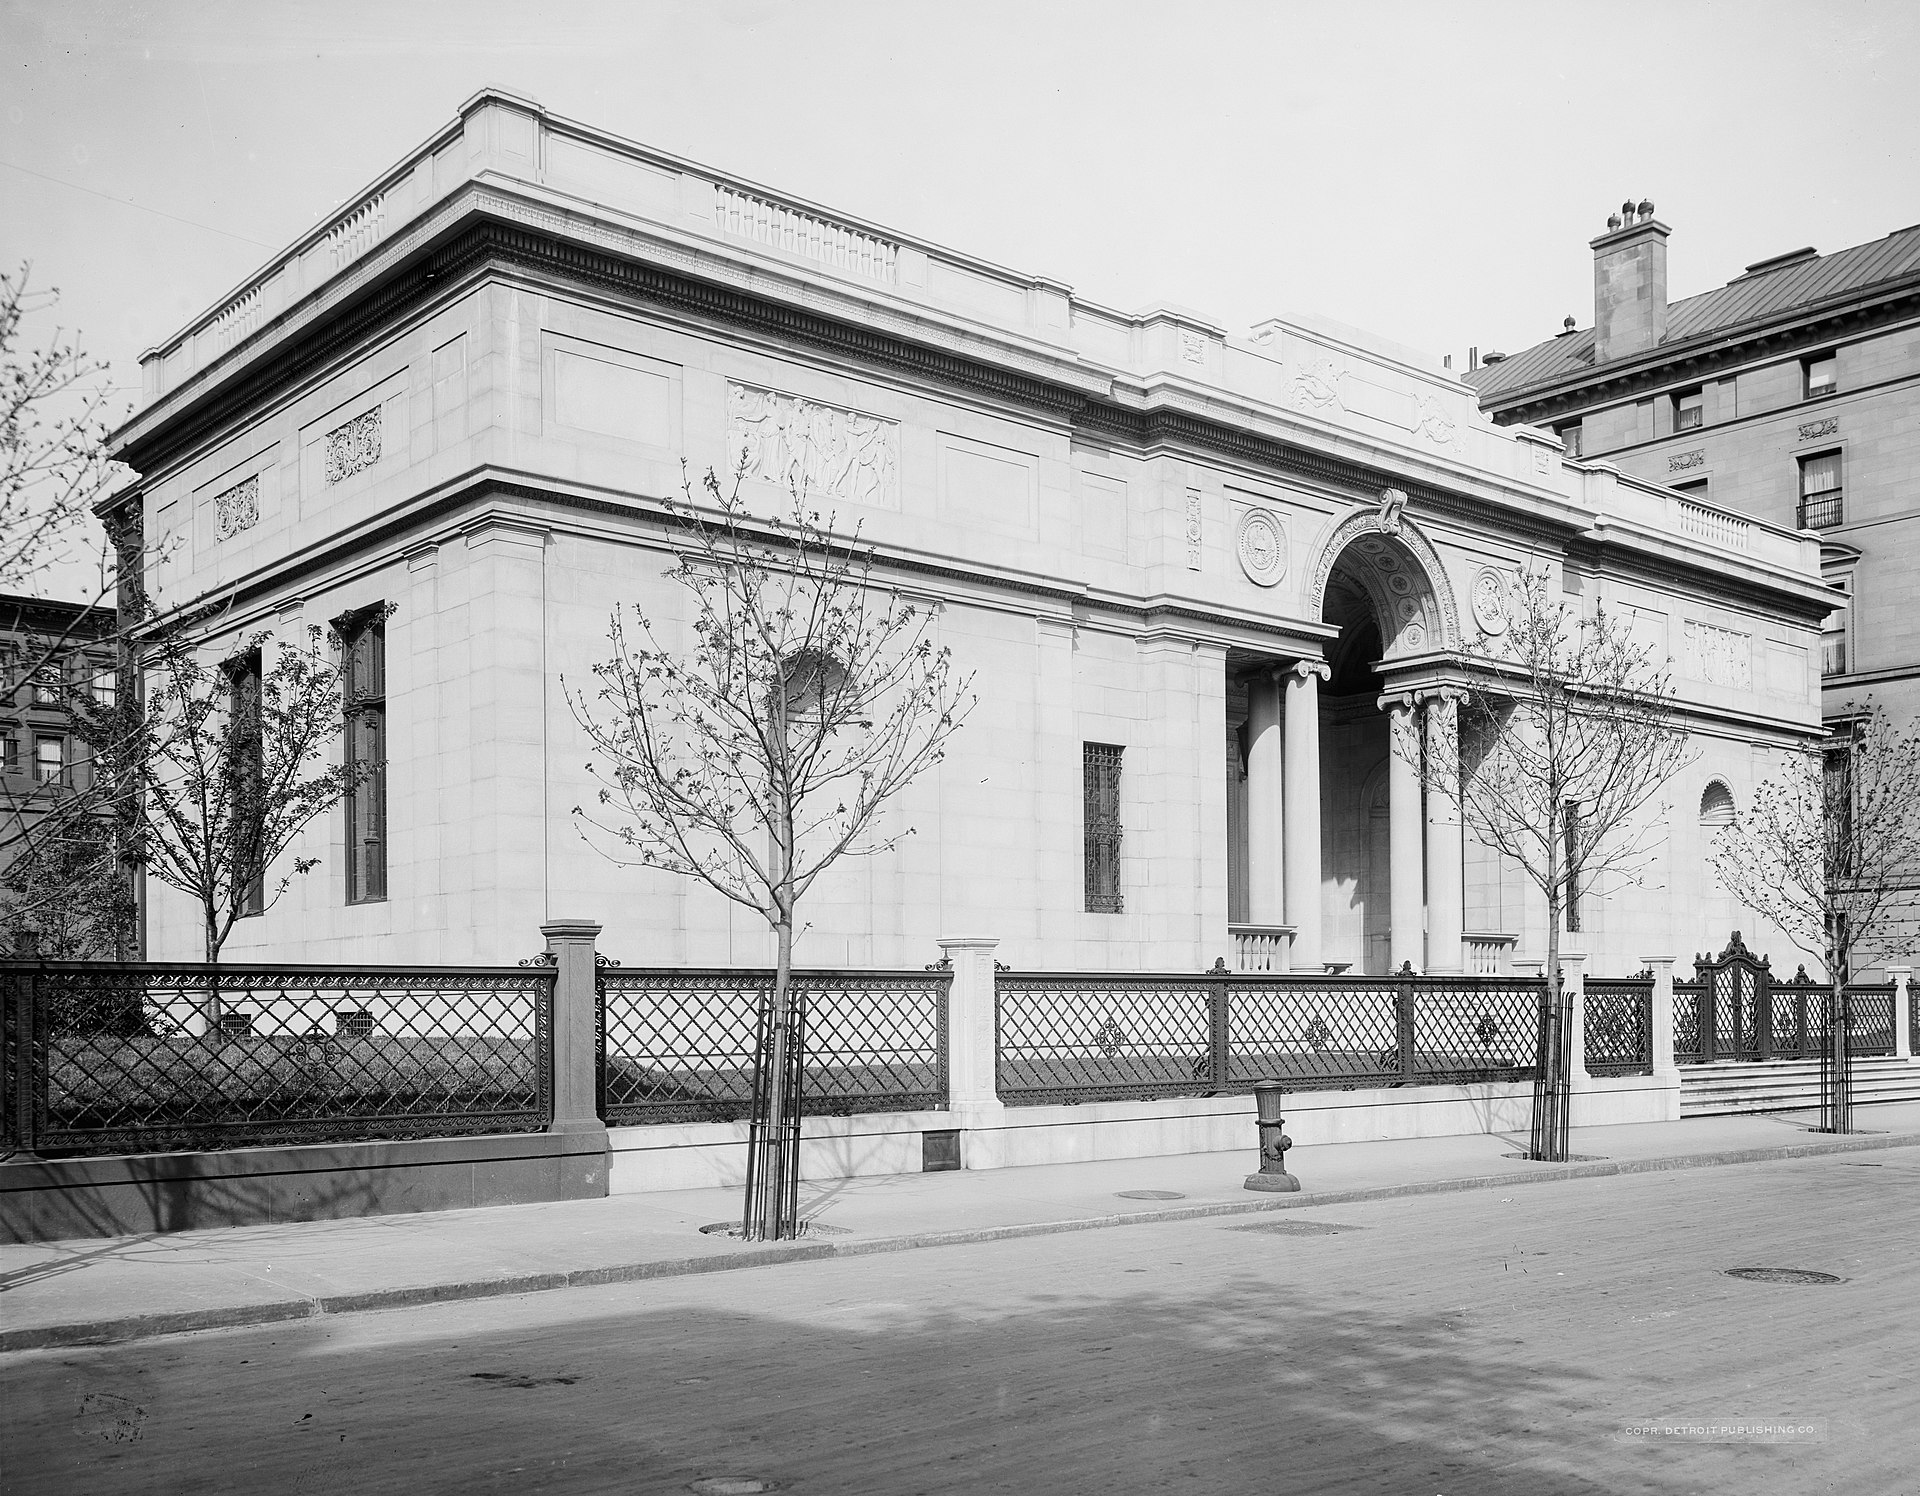 The library c. 1910, shortly after its completion